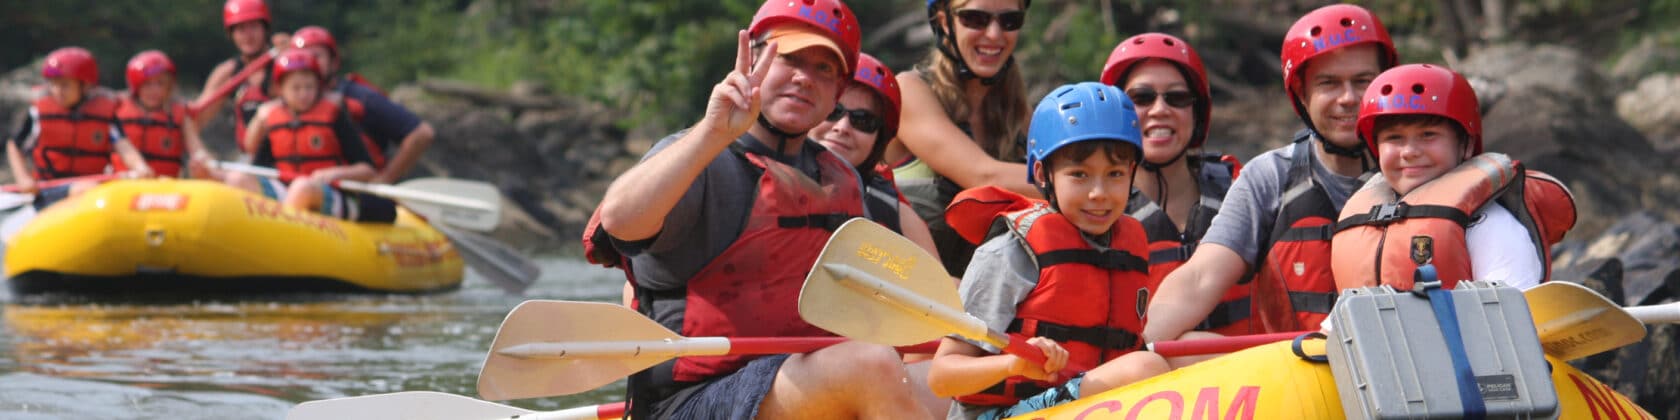 Rafters enjoyed the French Broad River while they have an incredible white water rafting adventure in Asheville, NC.